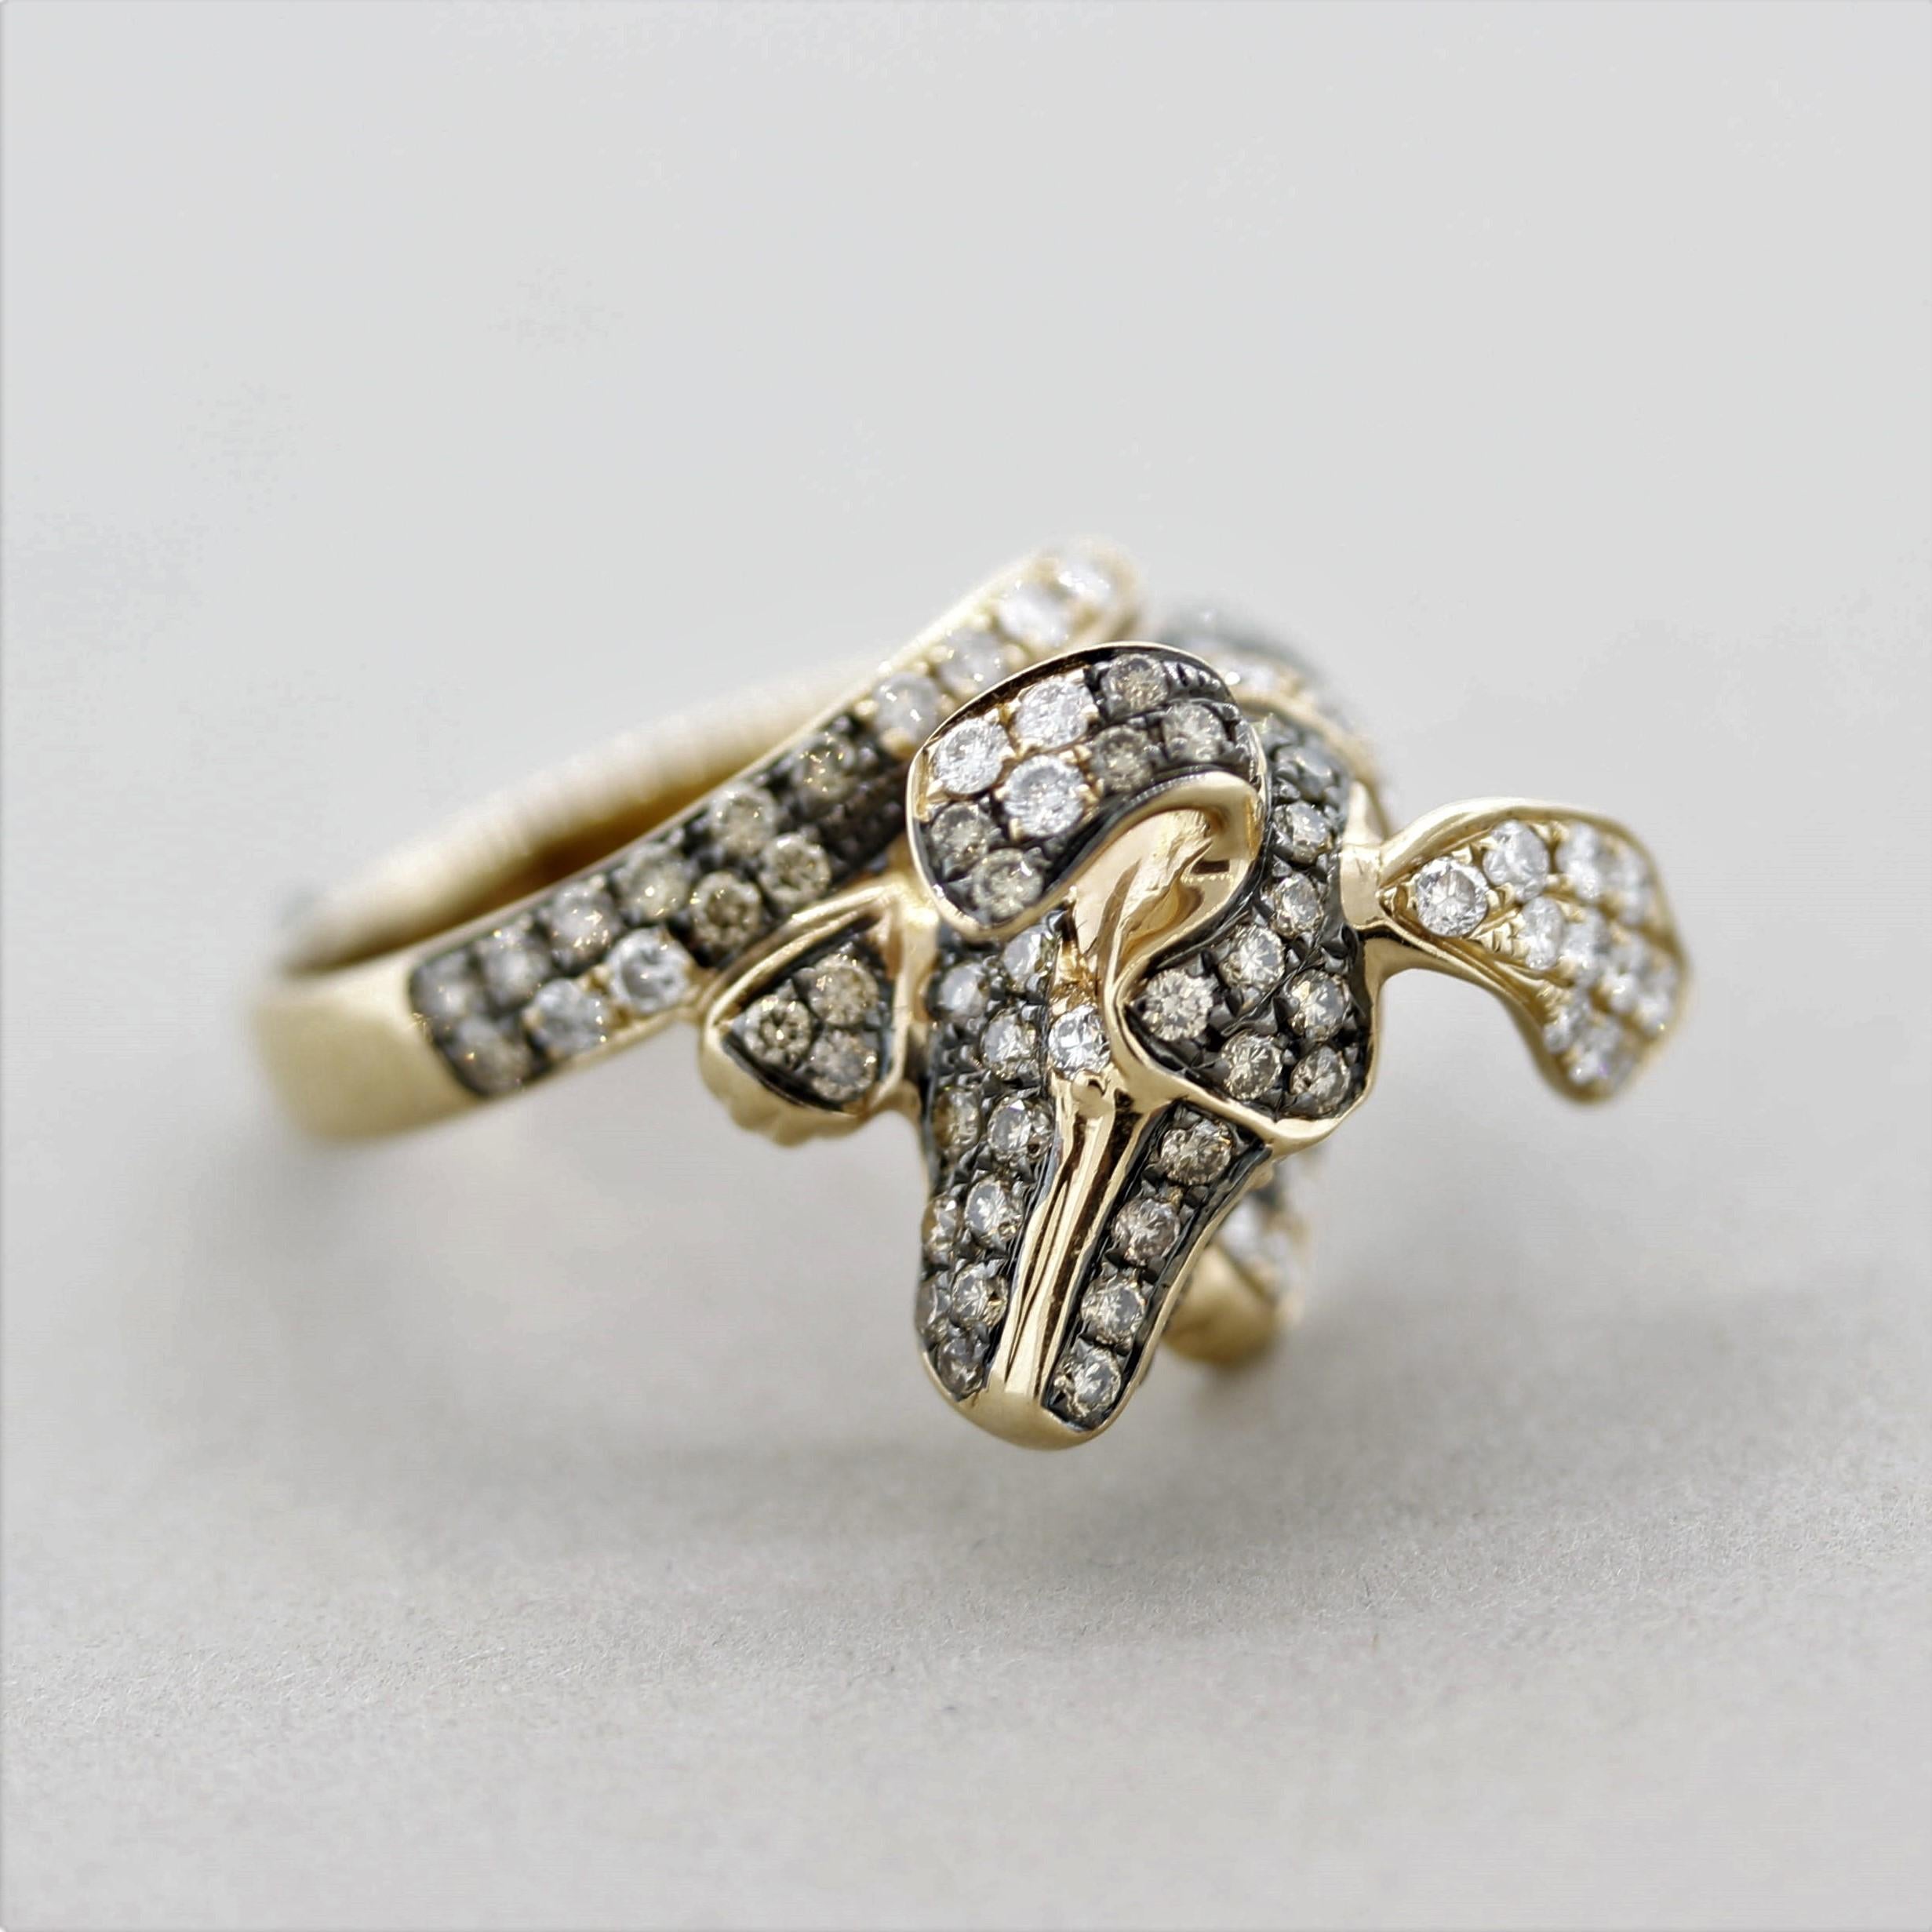 A sweet and stylish ring! It features 1.42 carats of white and fancy colored round brilliant-cut diamonds. The ring is shaped into a sweet dog with big floppy ears set with diamonds. Made in 18k rose gold with black rhodium accents.

Ring Size 6.50